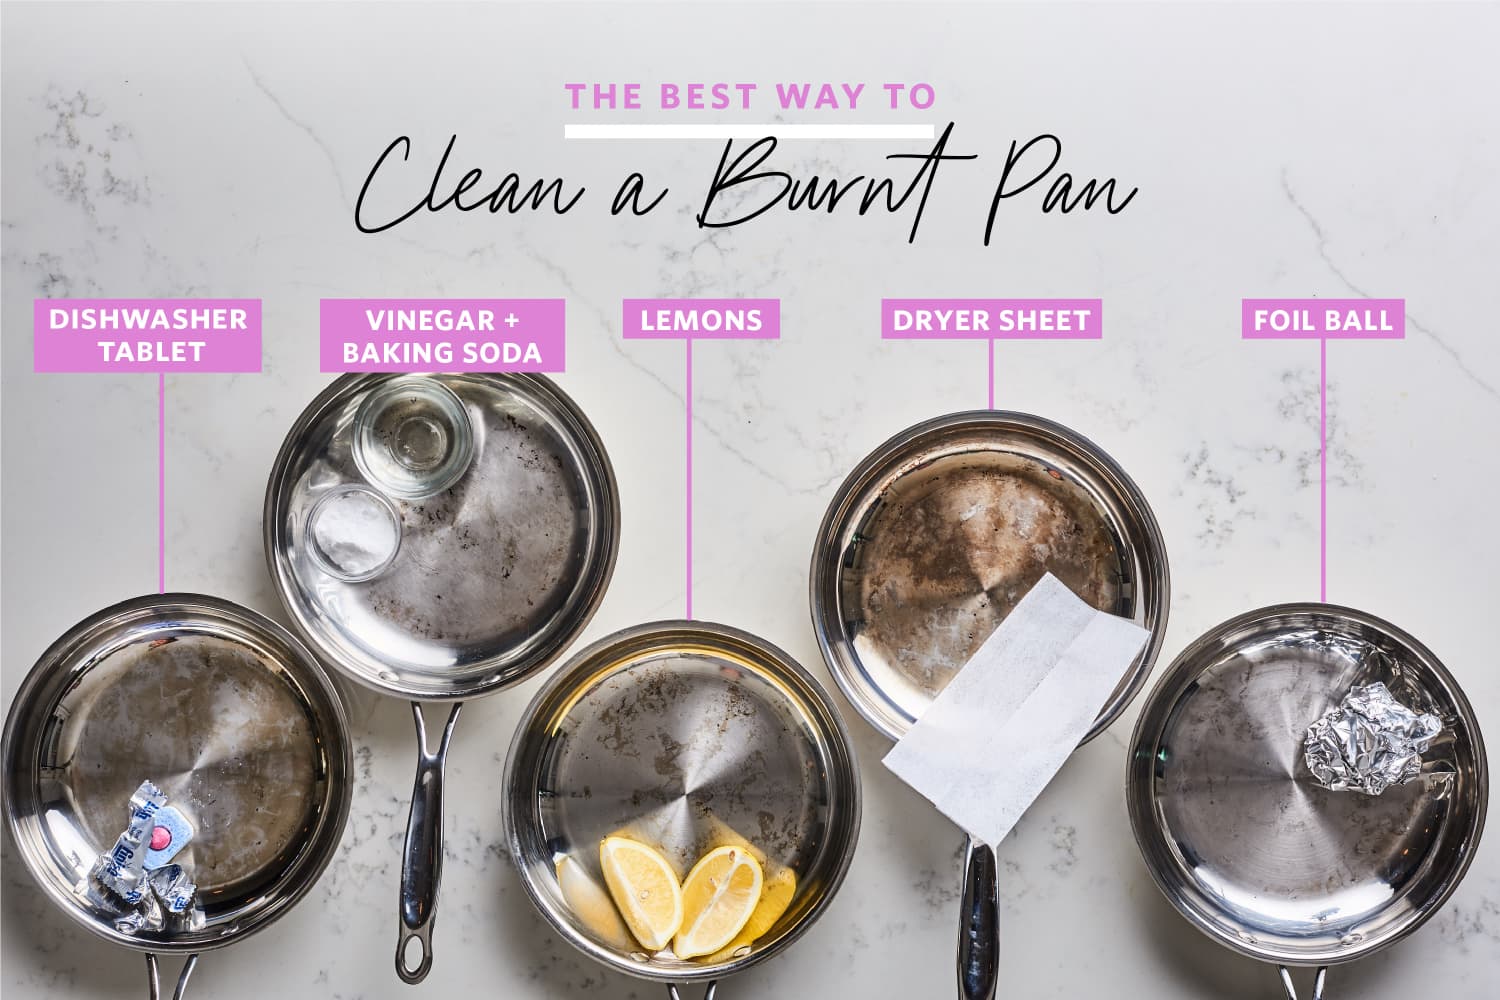 We Tried 5 Methods for Cleaning a Burnt Pan and Found a Clear Winner